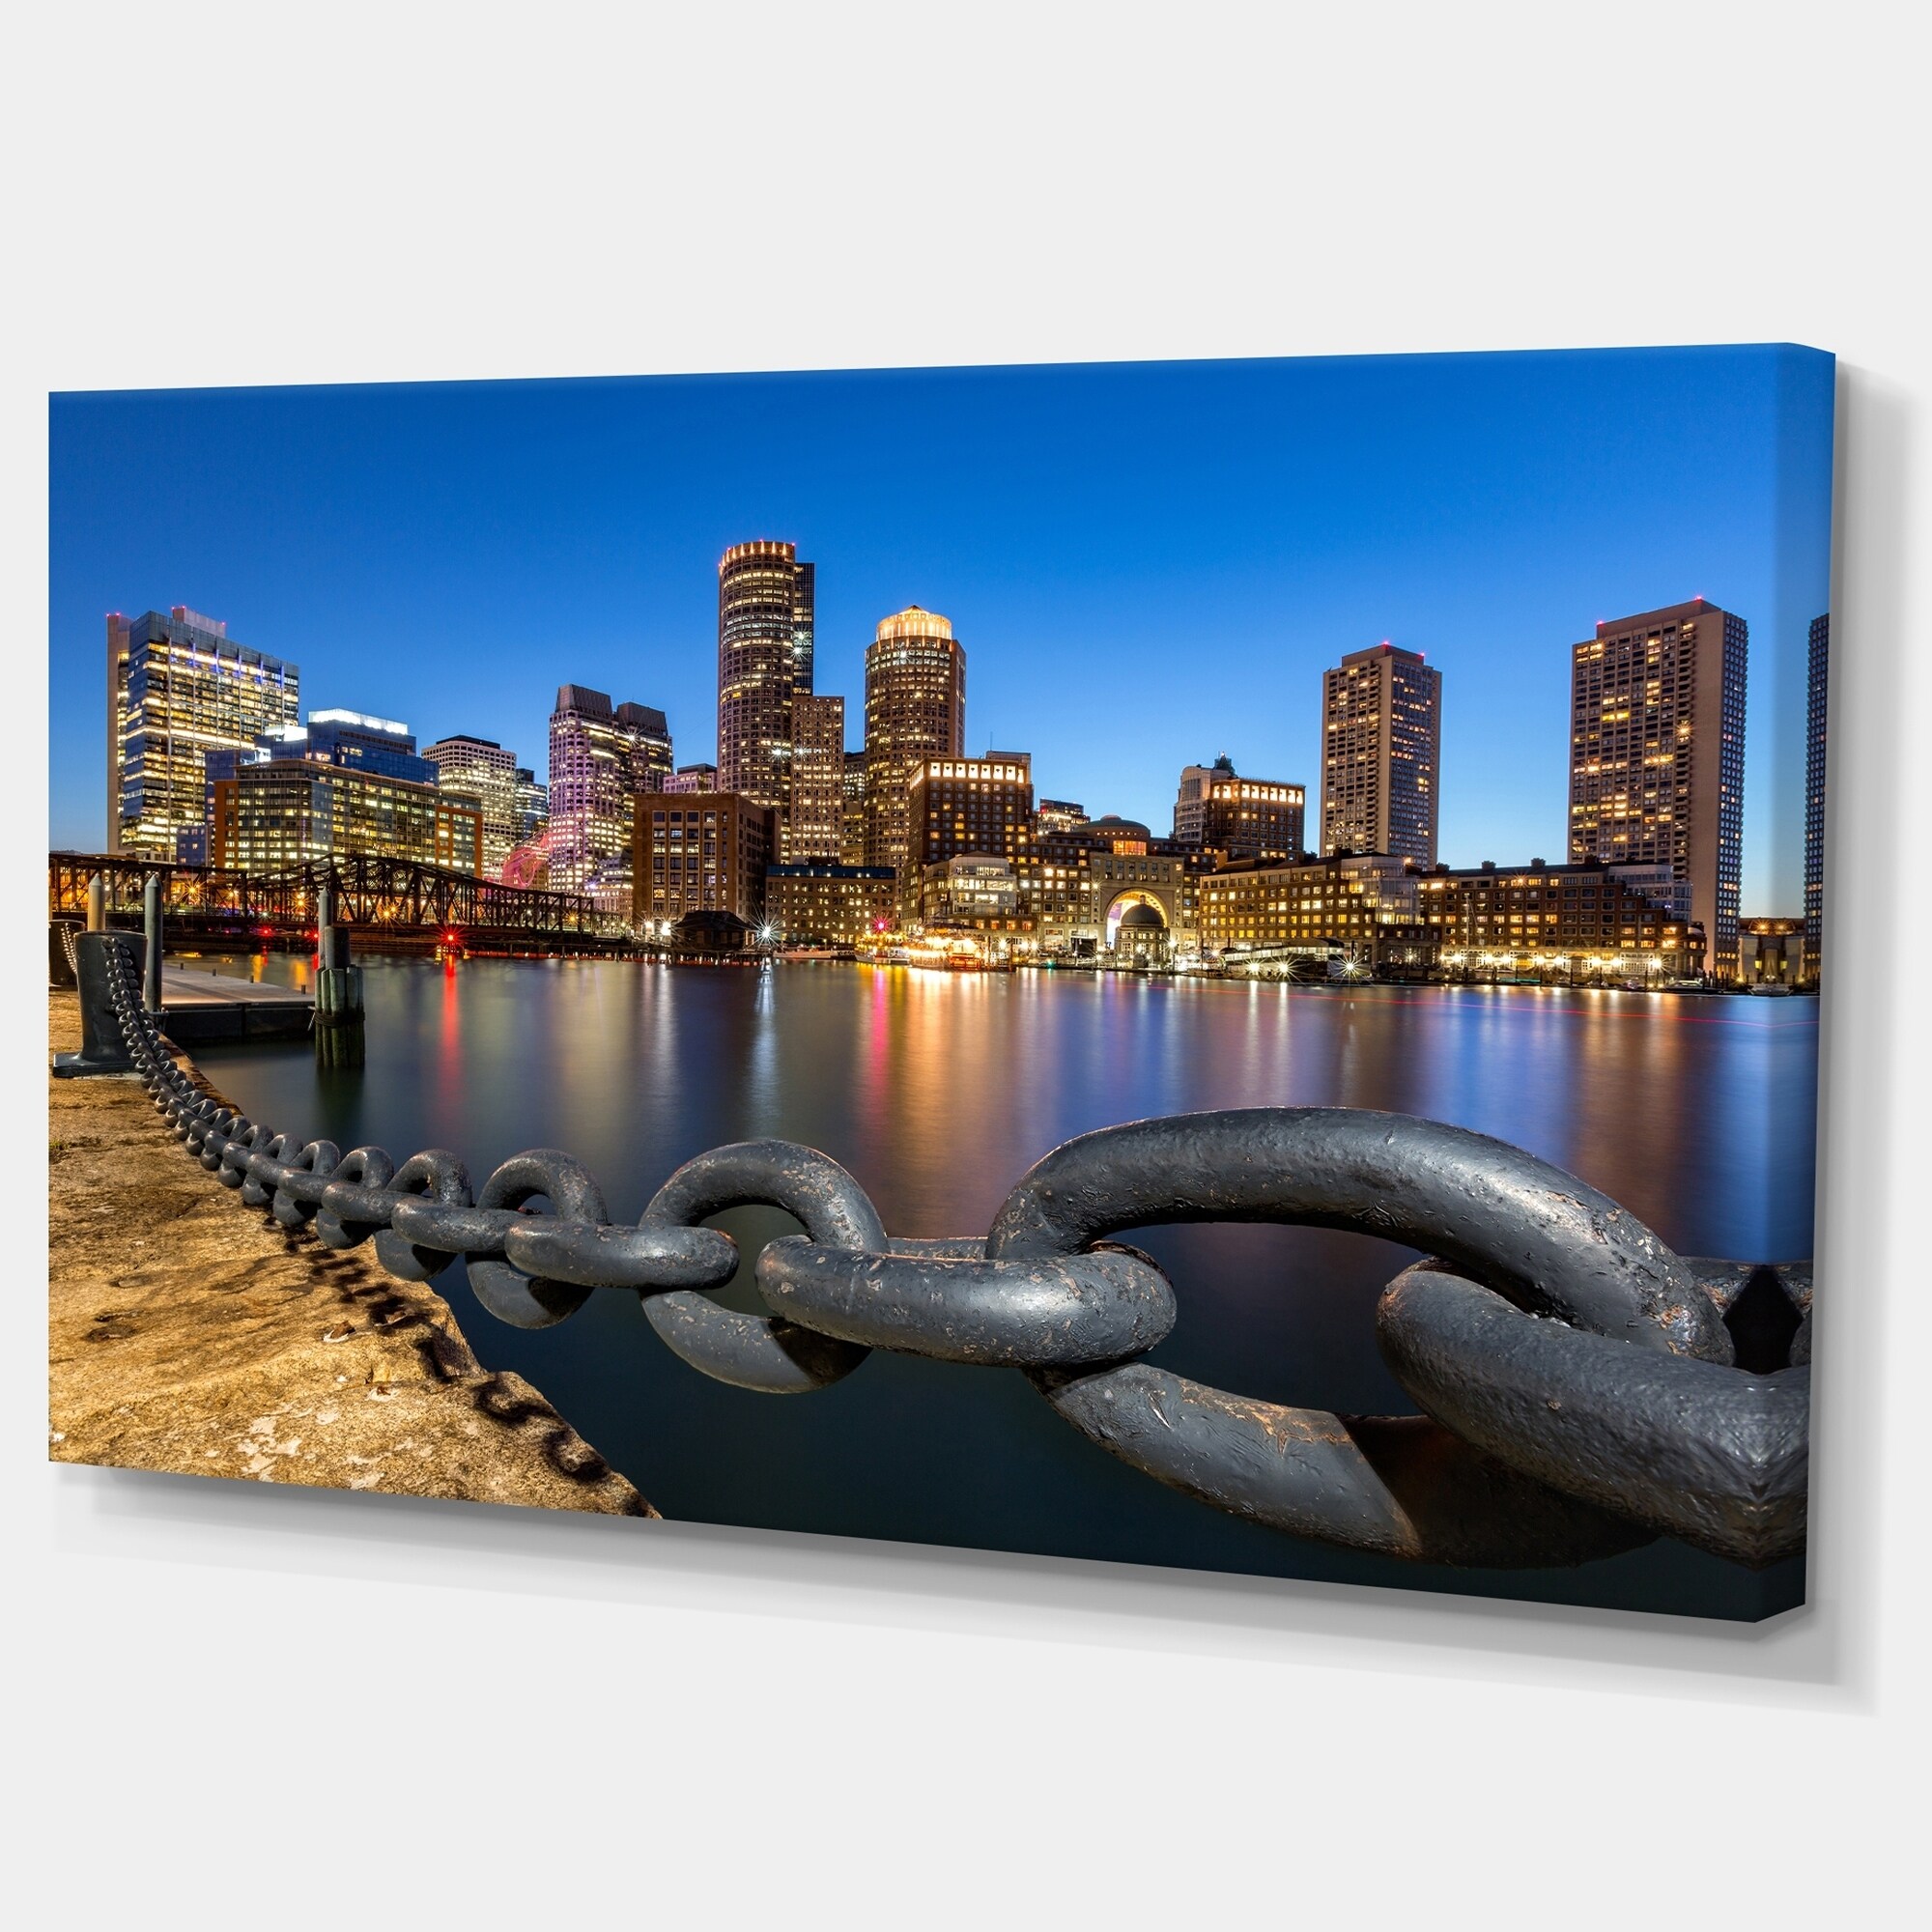 Boston Skyline ready to hang 5 piece mounted canvas wall art/surpassed stretched